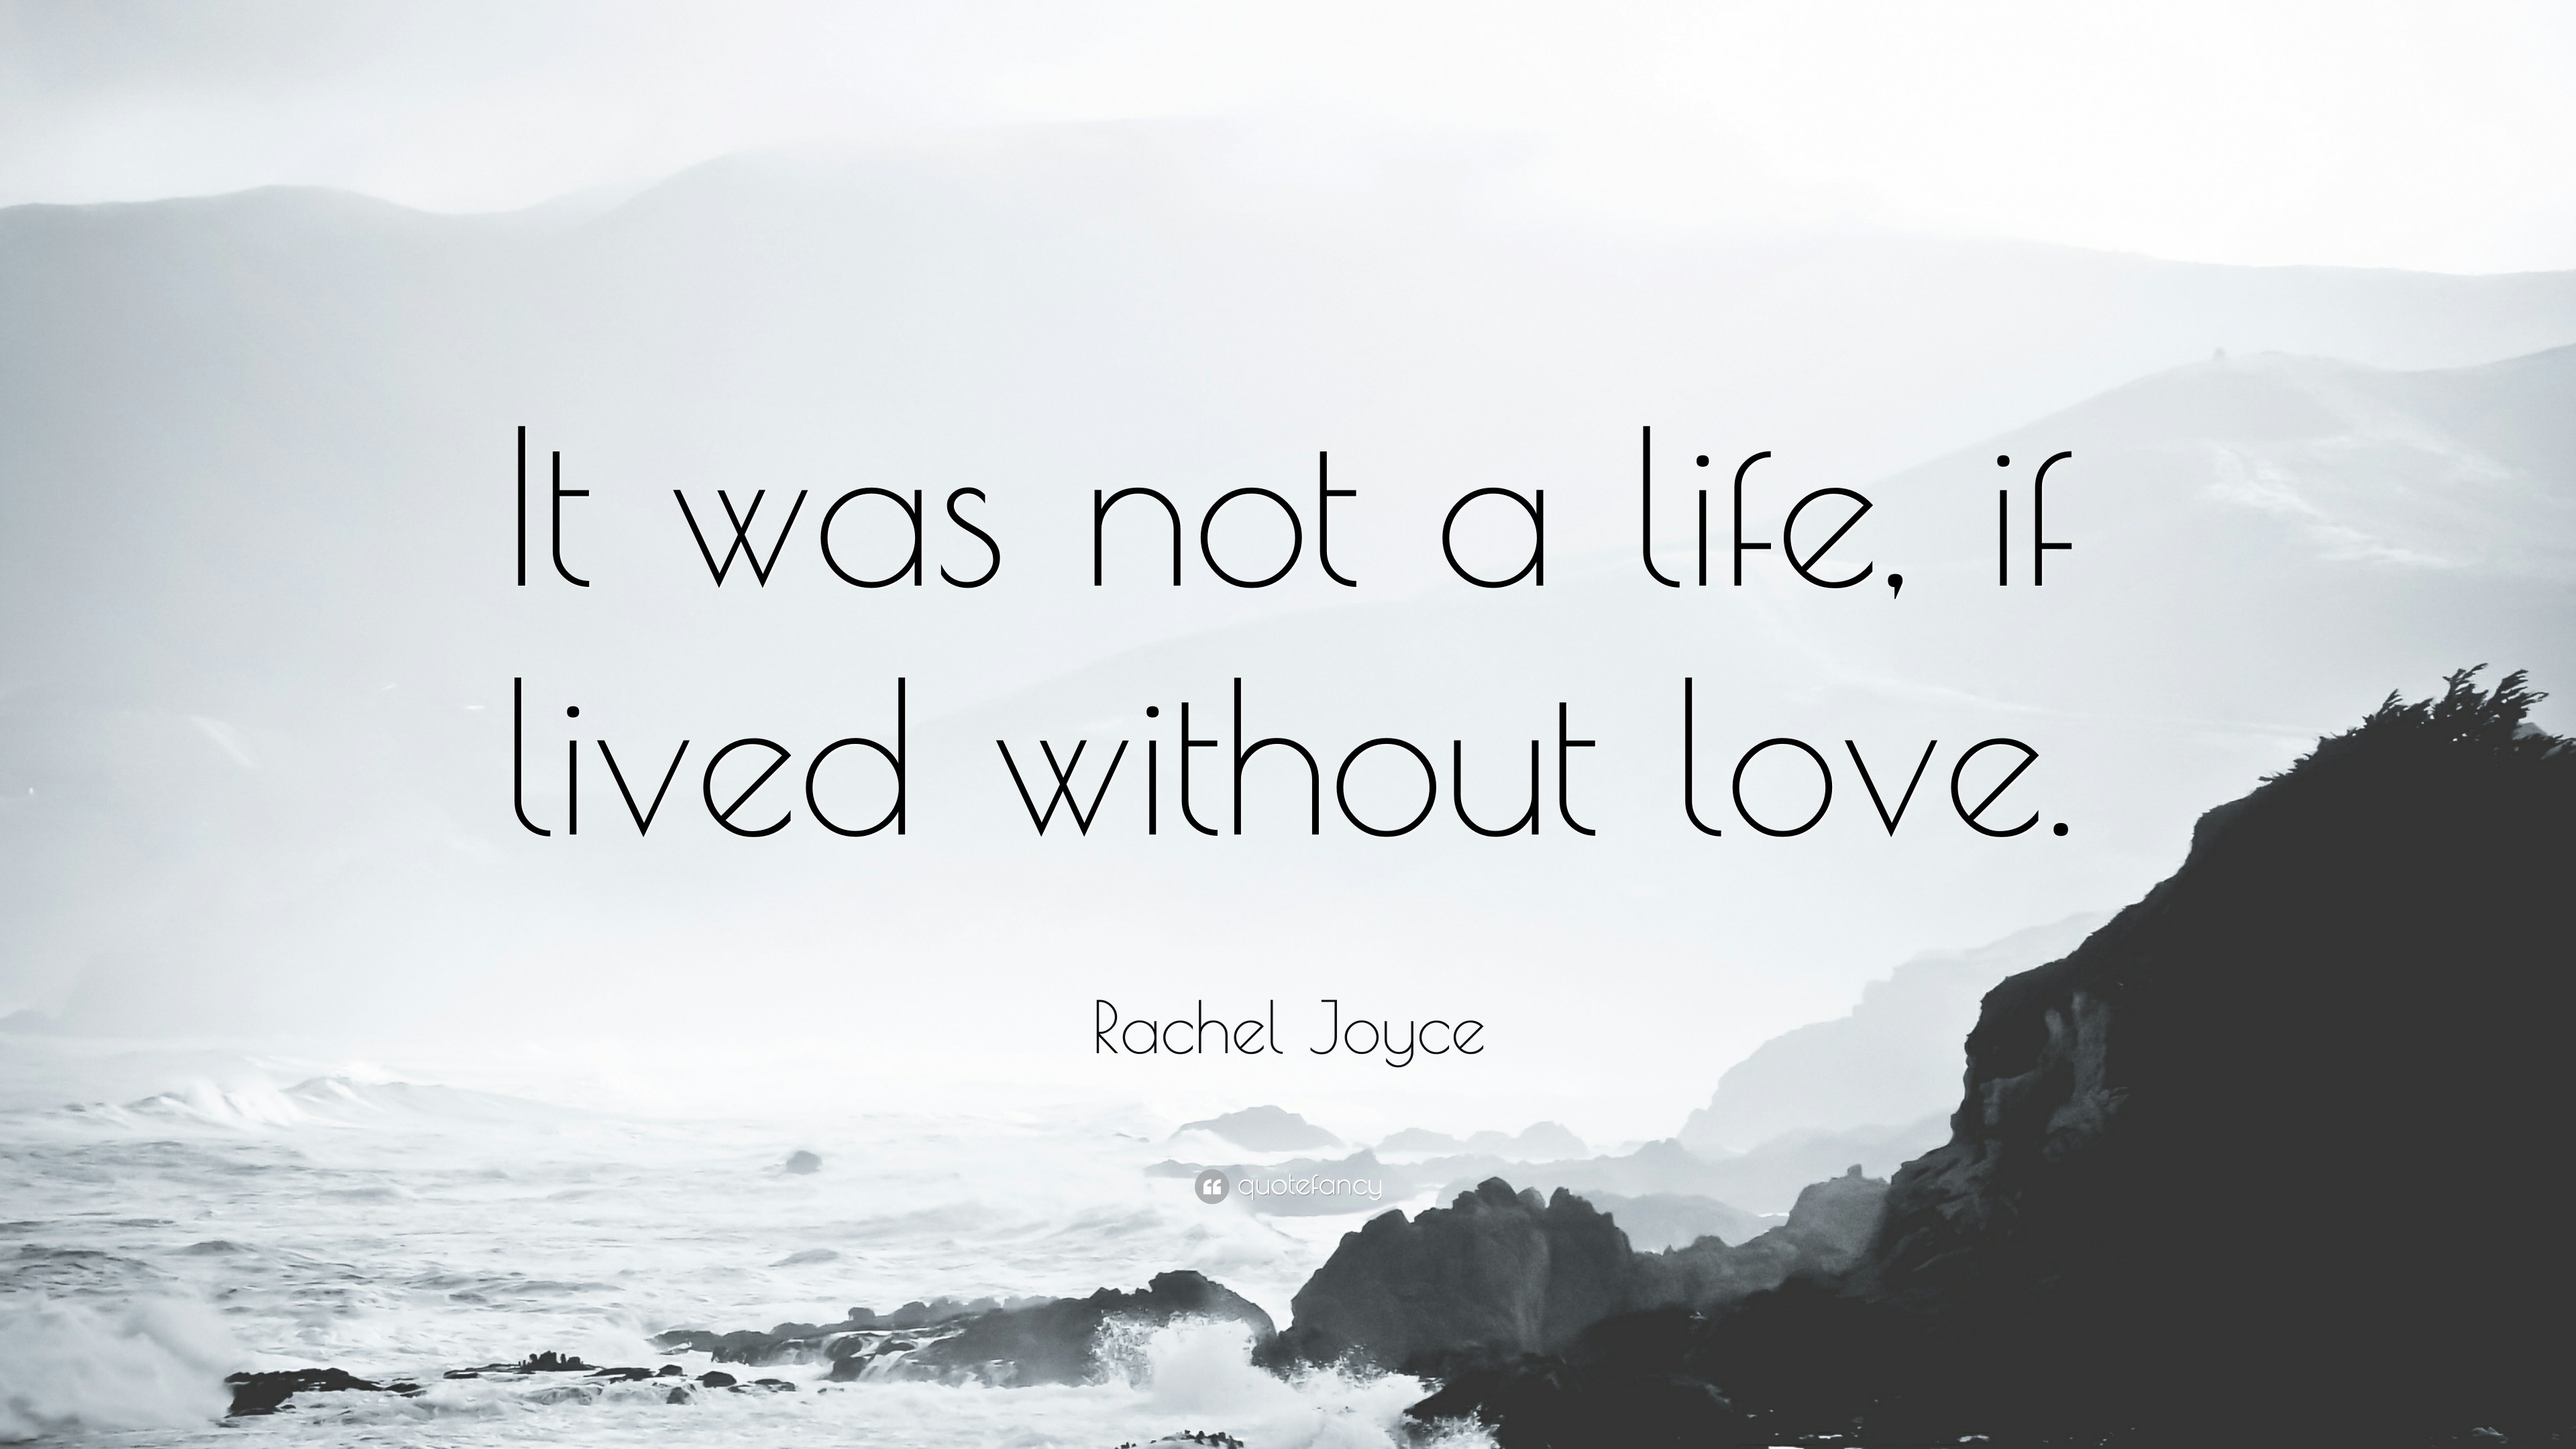 Rachel Joyce Quote: “Real love was a journey with many pitfalls and  complications, and sometimes the place you ended up was not the one you  h”